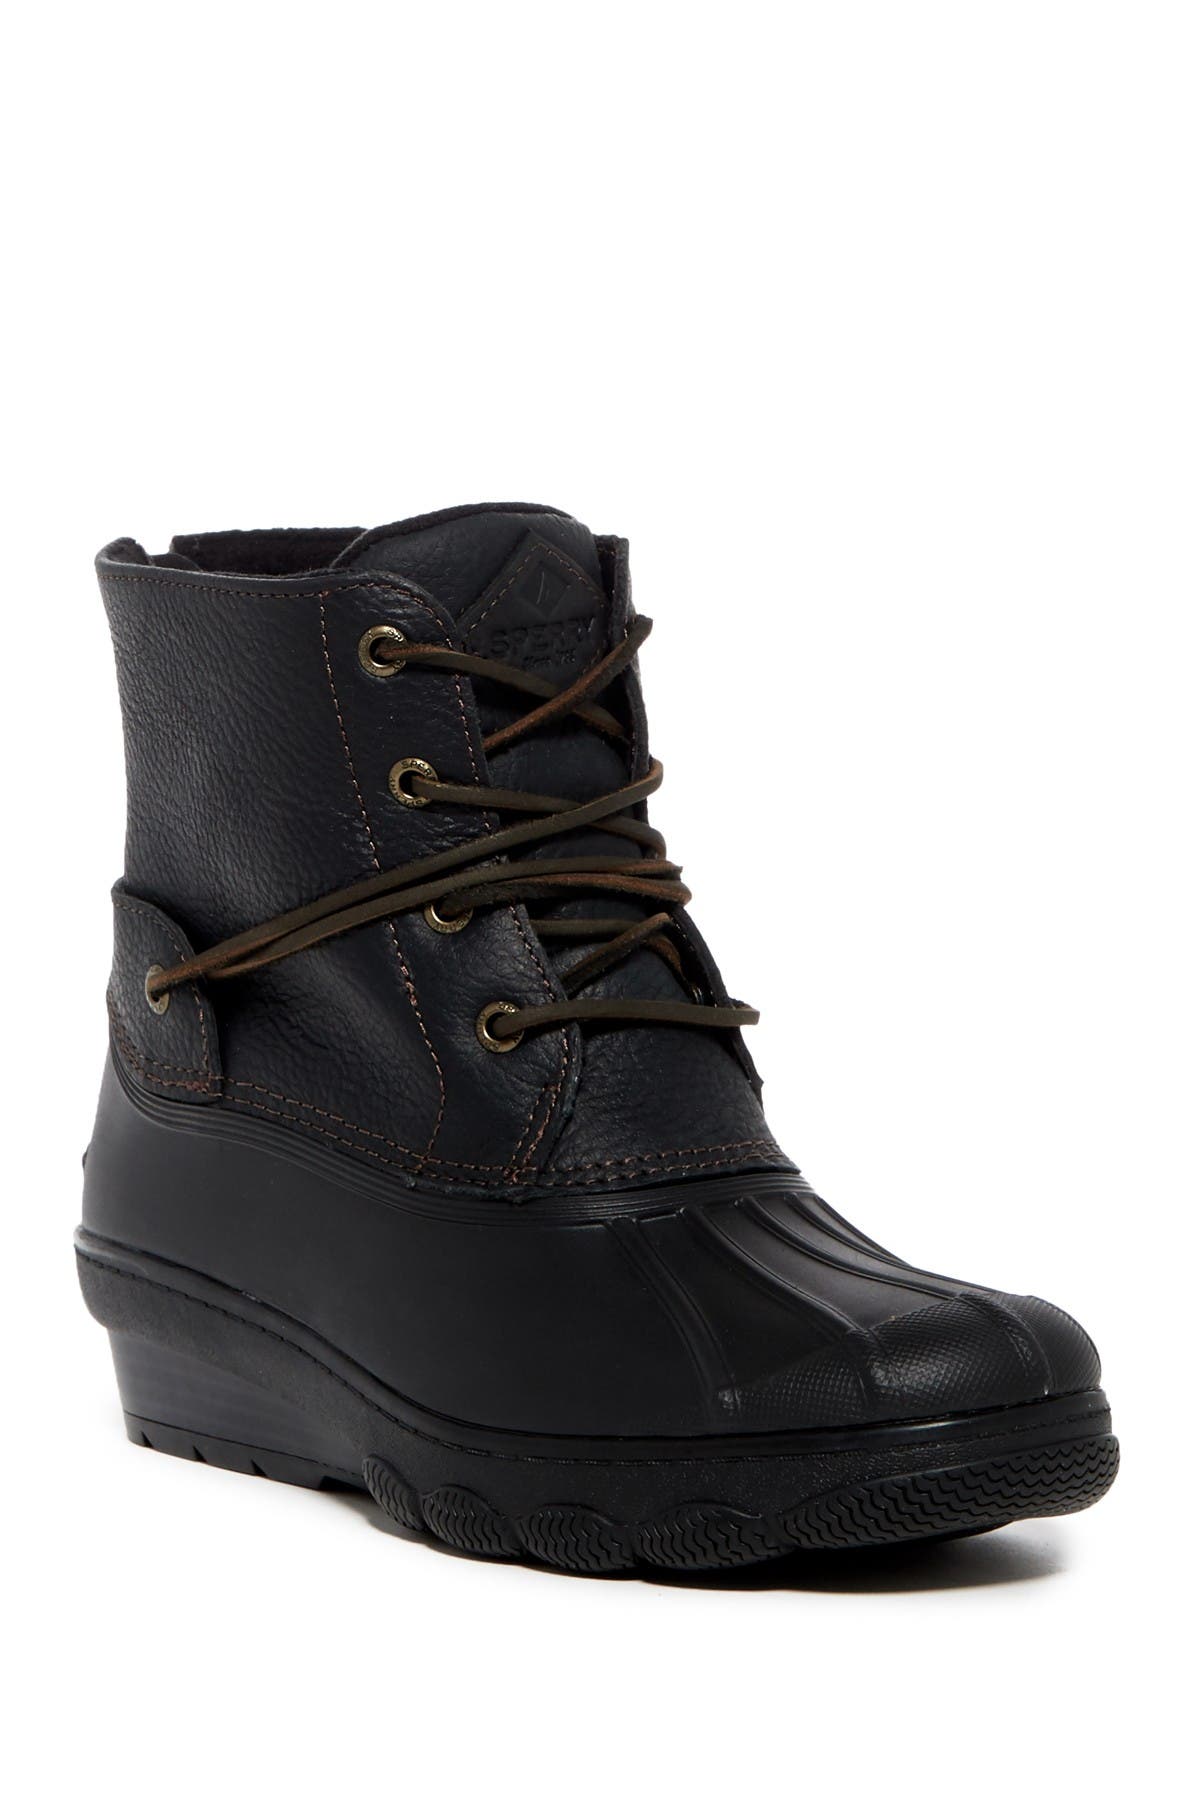 sperry saltwater wedge tide leather boot